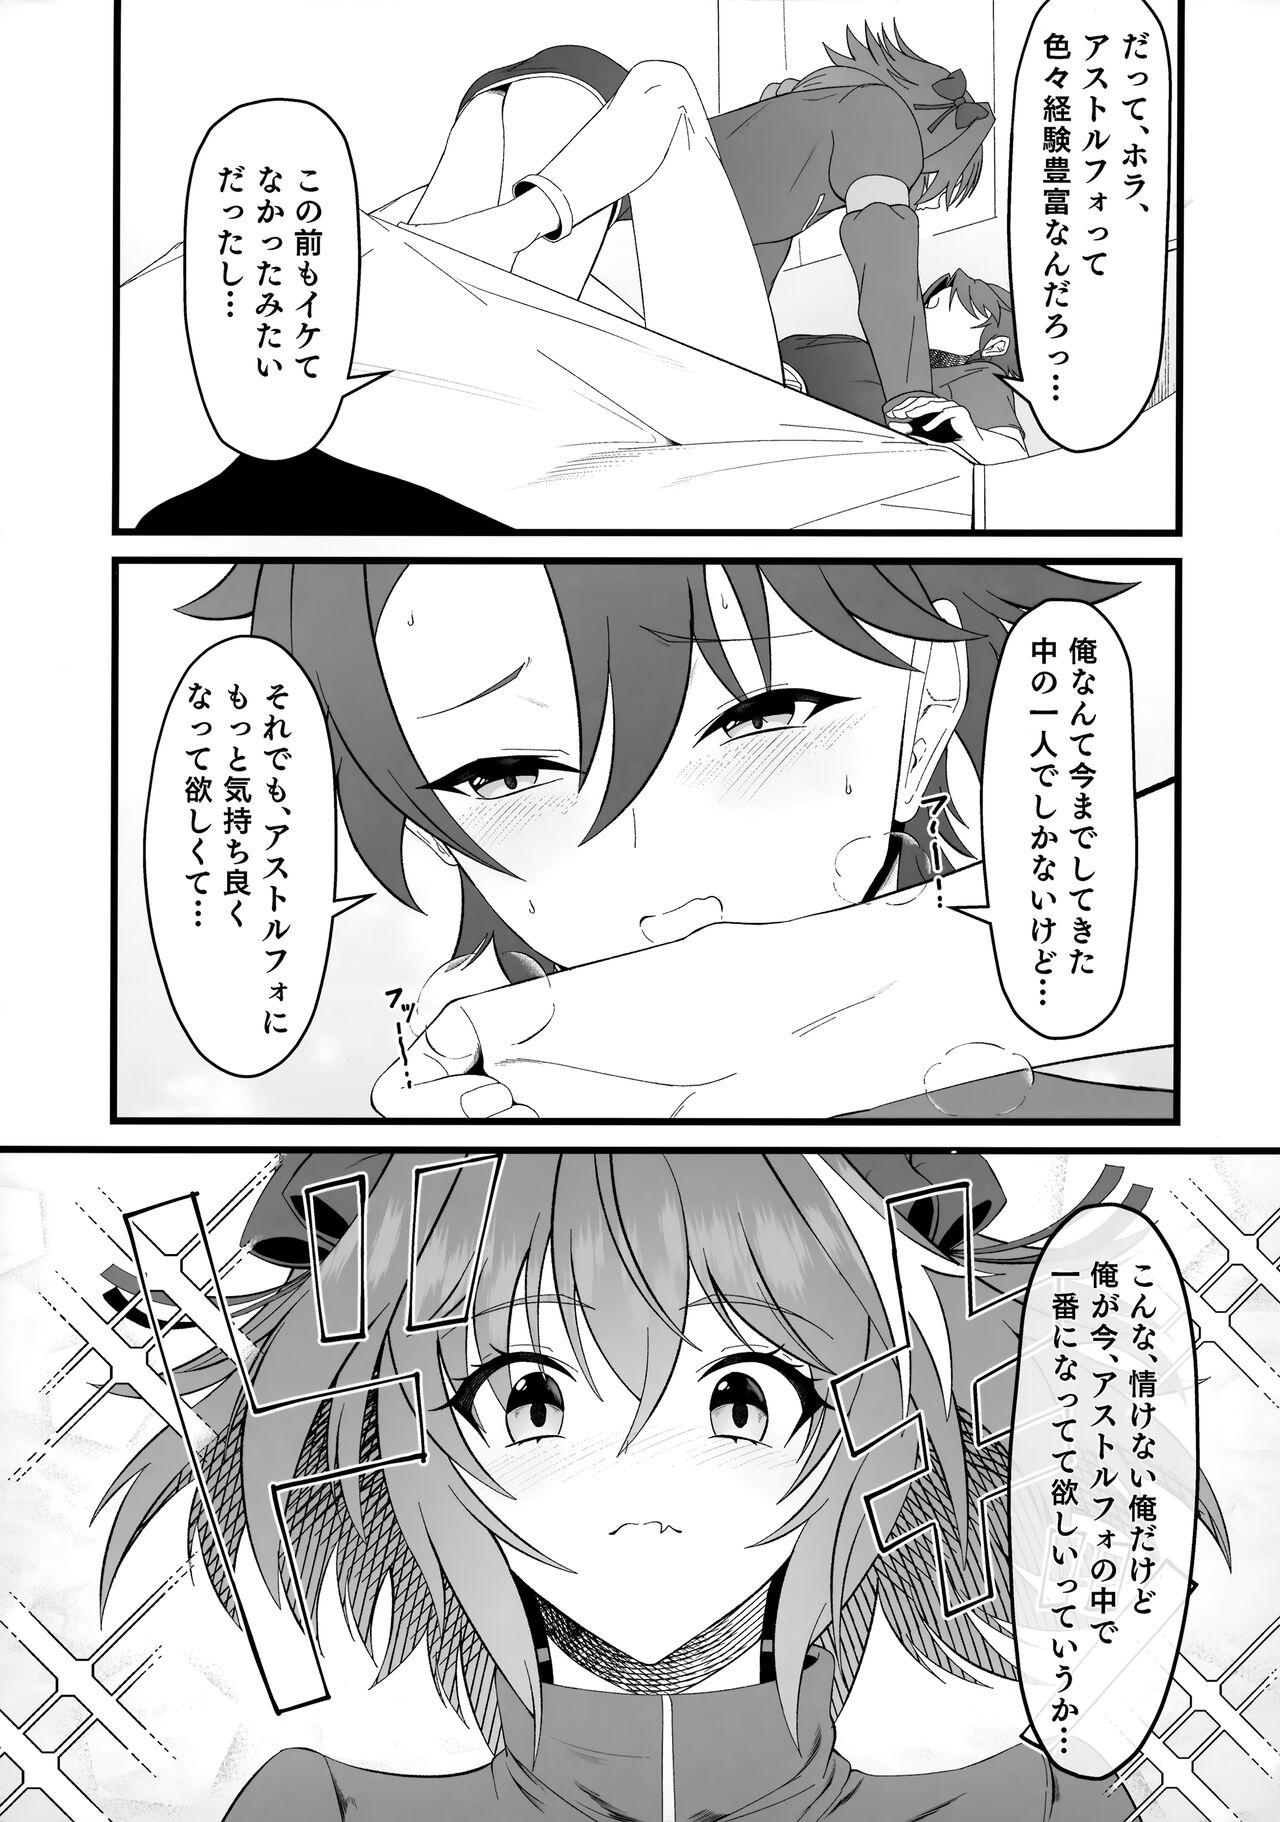 Cousin Kimi no Ichiban ni Naritakute - I wanted to be your number one. - Fate grand order Spank - Page 8